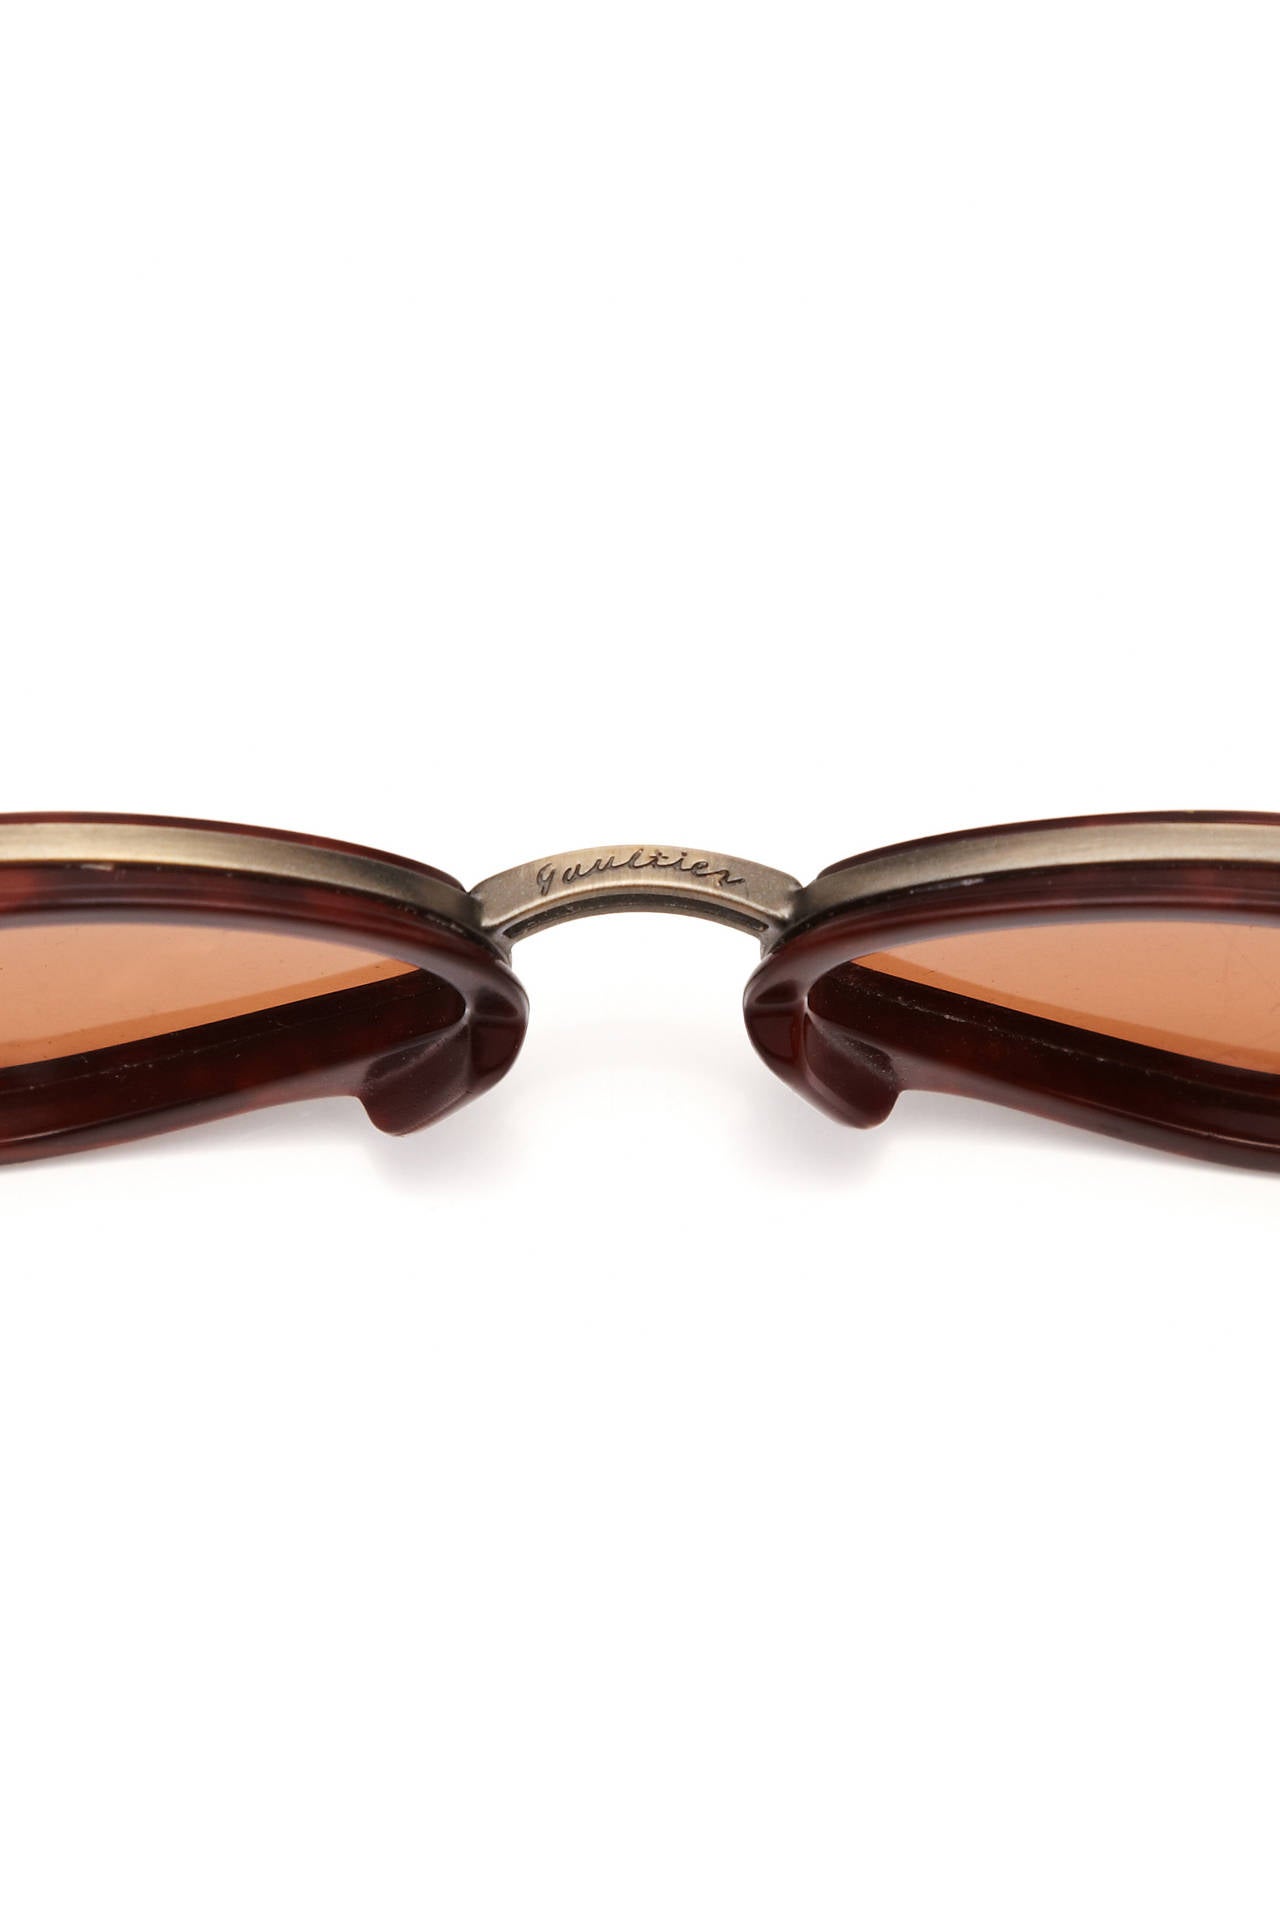 Rare Jean Paul Gaultier 1990s sunglasses model 56-0015.  This pair is in a 1930s aviator style with a brown plastic marble effect base and chrome detailing.  Made in made in Japan and in excellent condition. 

Meaurements:
Width: 14cm/ 5.5”
Arm